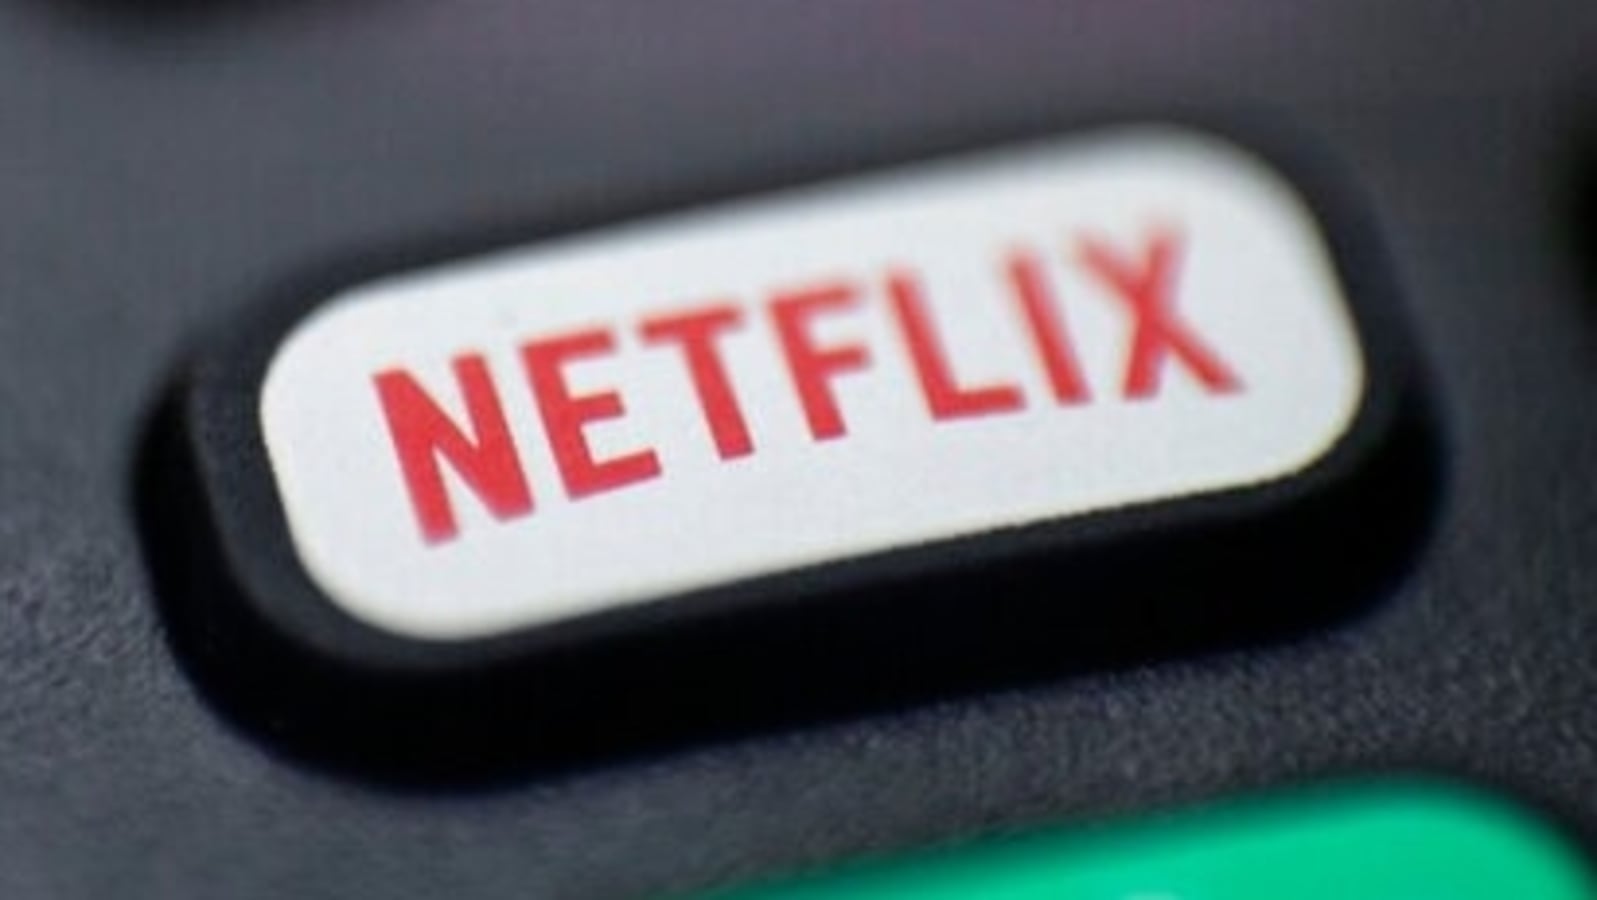 Passing on your password? Streaming services are past it